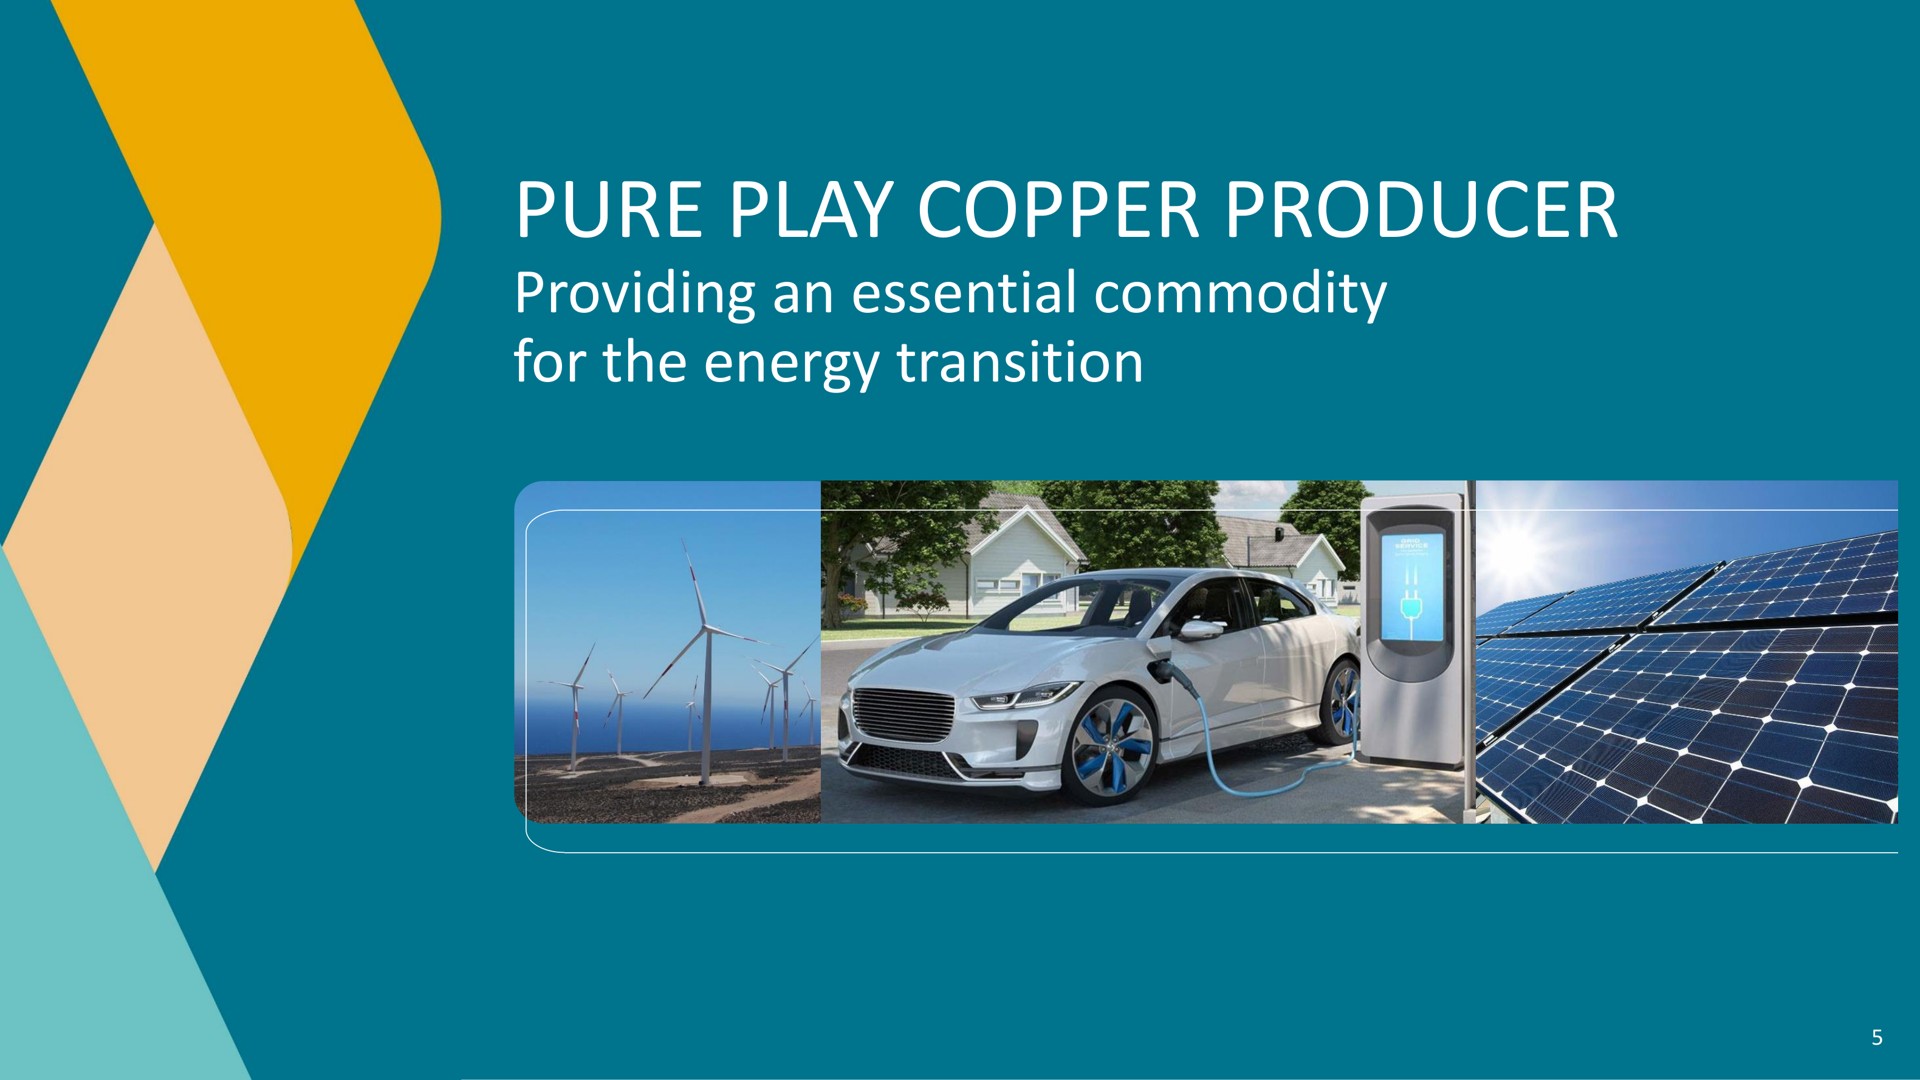 pure play copper producer providing an essential commodity for the energy transition | Antofagasta